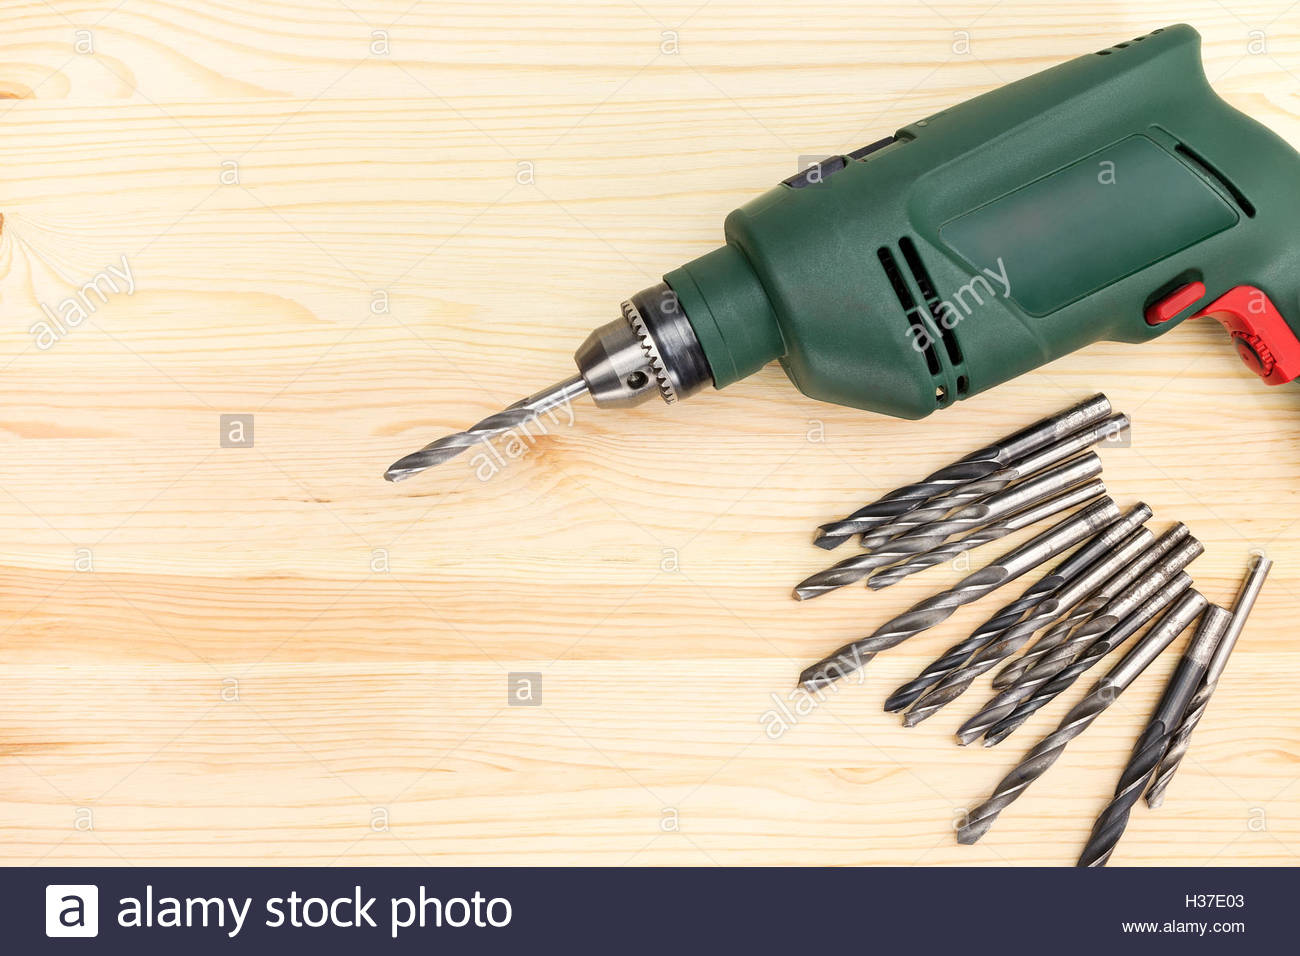 Portable Hand Electric Drill On Wooden Background Stock Photo